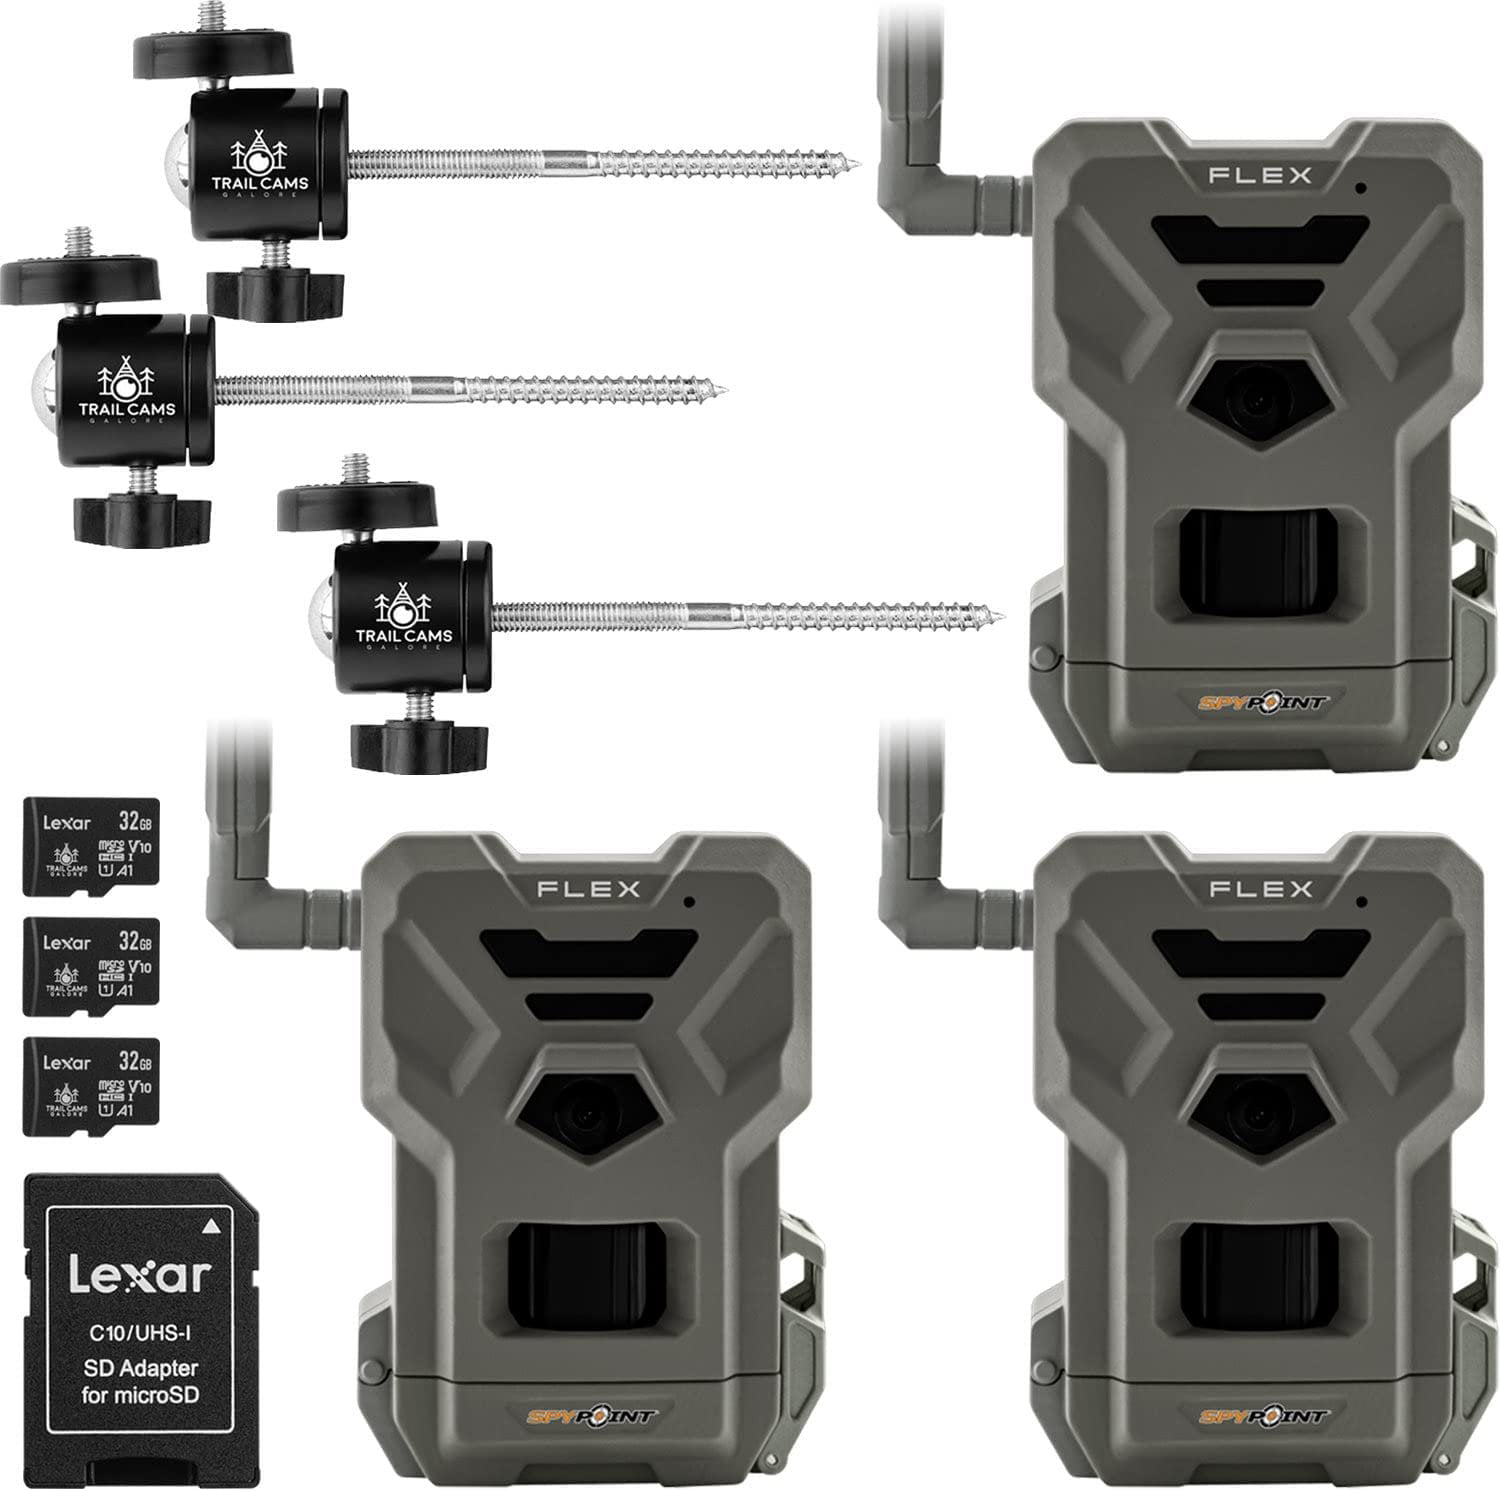 SPYPOINT Flex Dual-Sim Cellular Trail Camera 33MP Photos 1080p Videos with Sound and On-Demand Photo/Video Requests - GPS Enabled Mount Bundle with Lexar 32GB Micro SD Card 3 PK